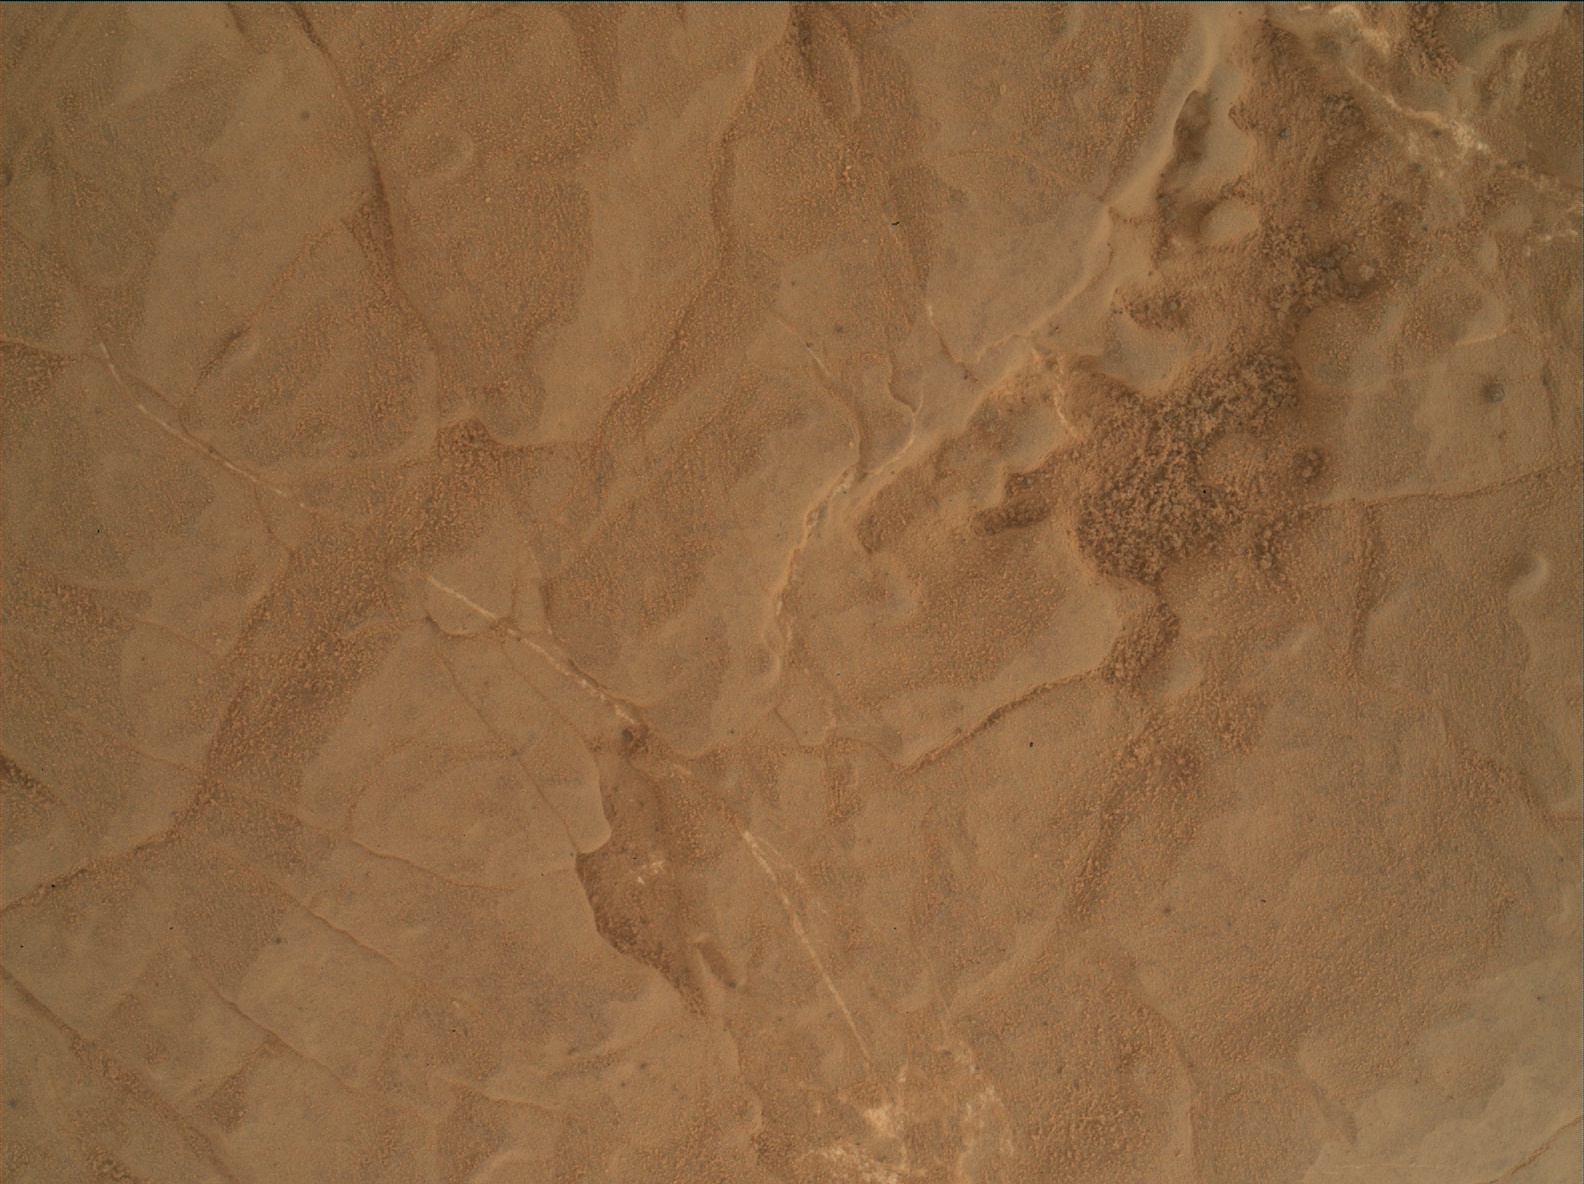 Nasa's Mars rover Curiosity acquired this image using its Mars Hand Lens Imager (MAHLI) on Sol 3047